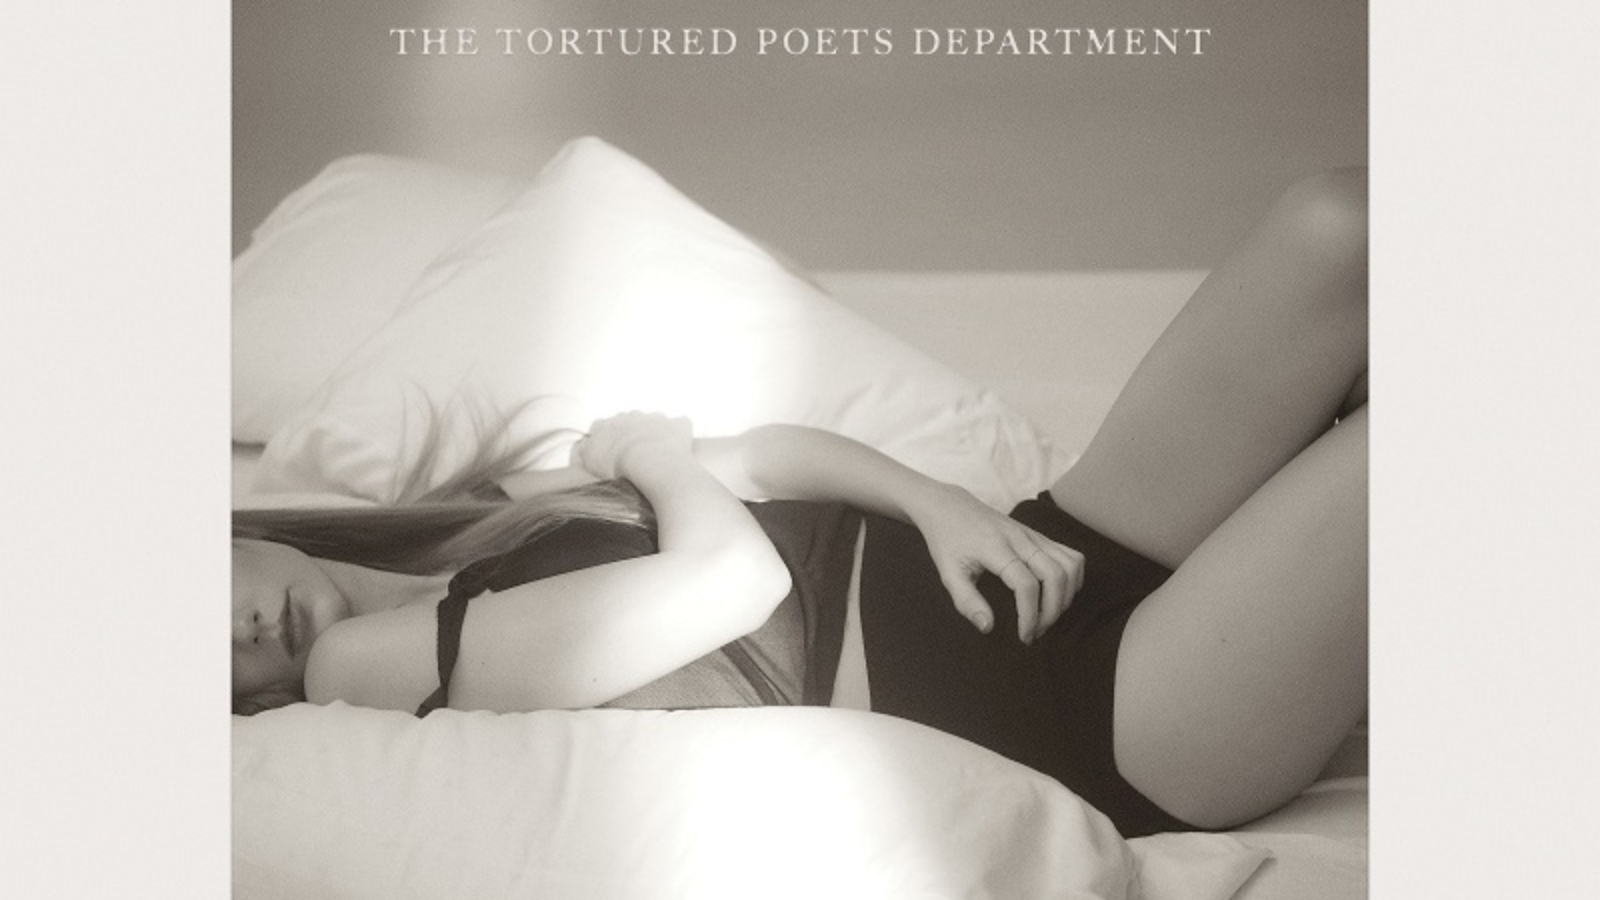 Taylor Swift - The Tortured Poets Department